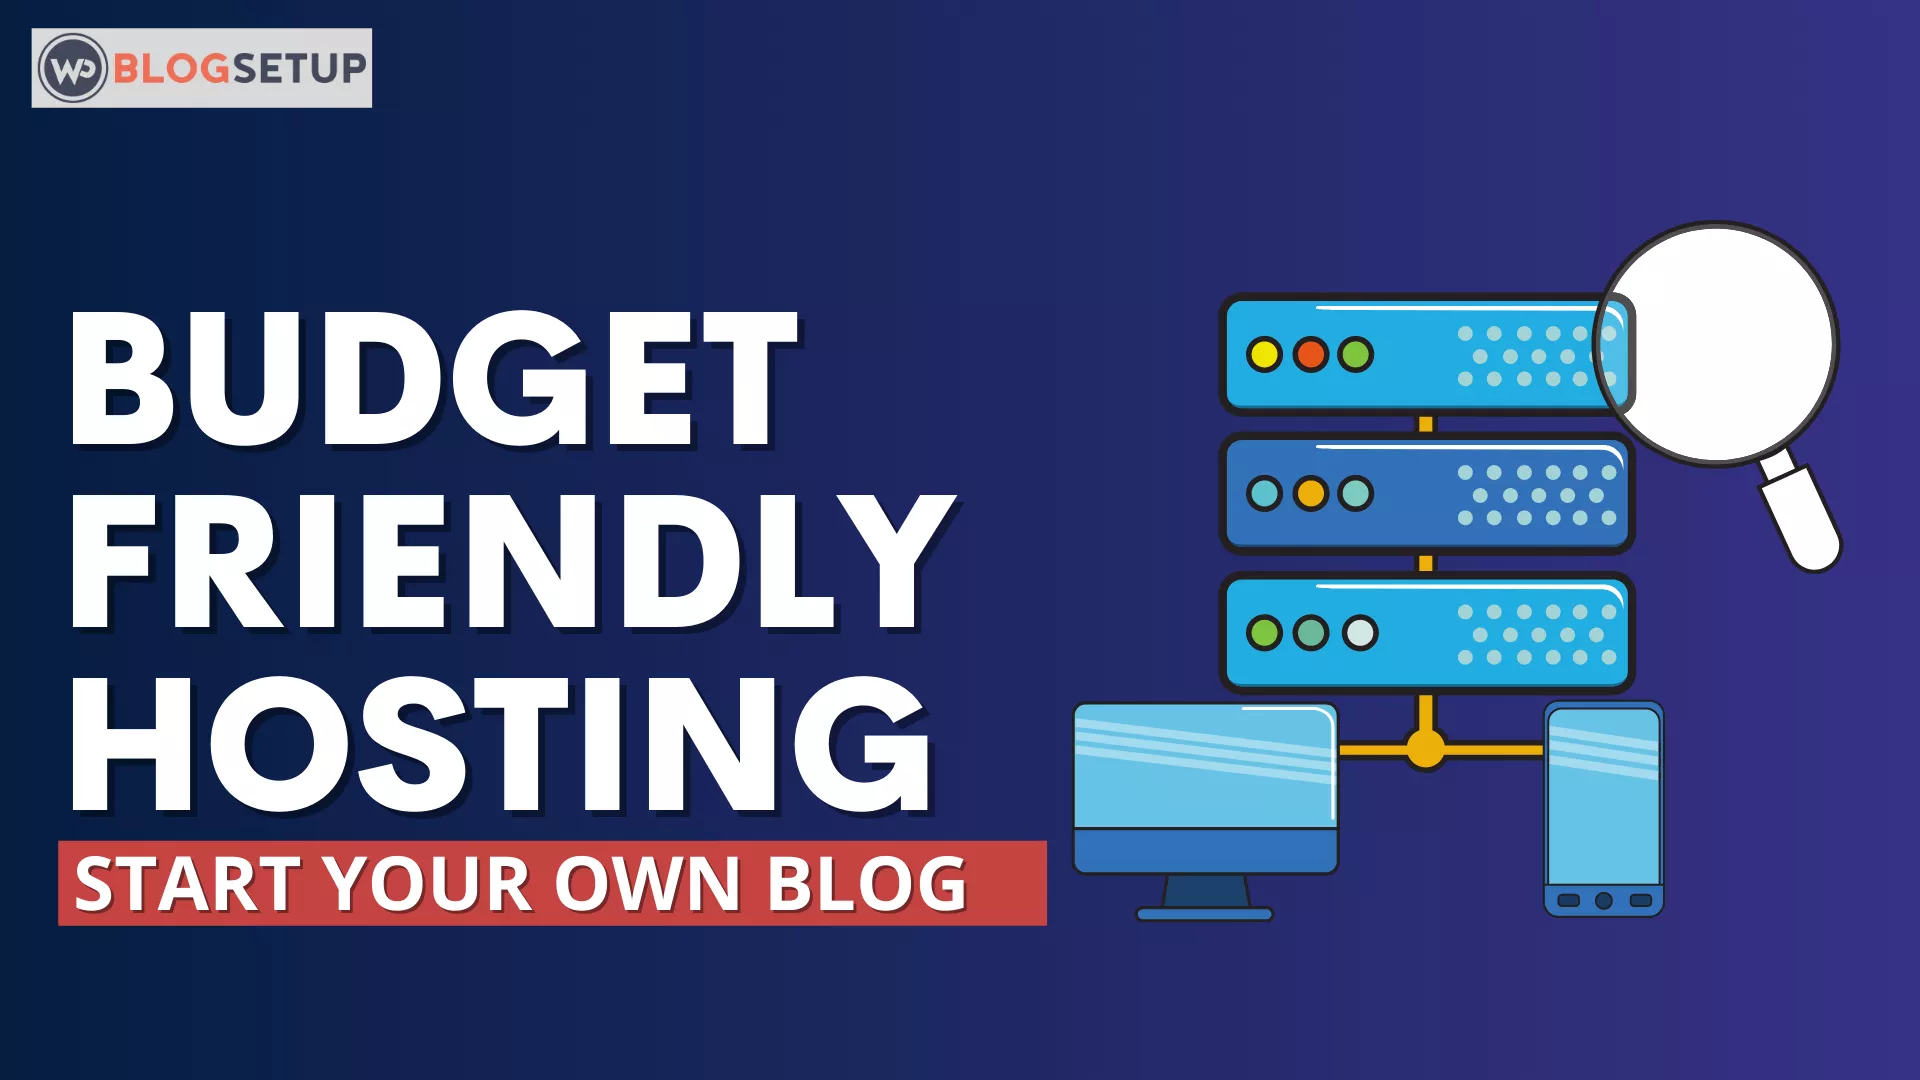 Best Budget-Friendly Hosting To Get Started With Blogging